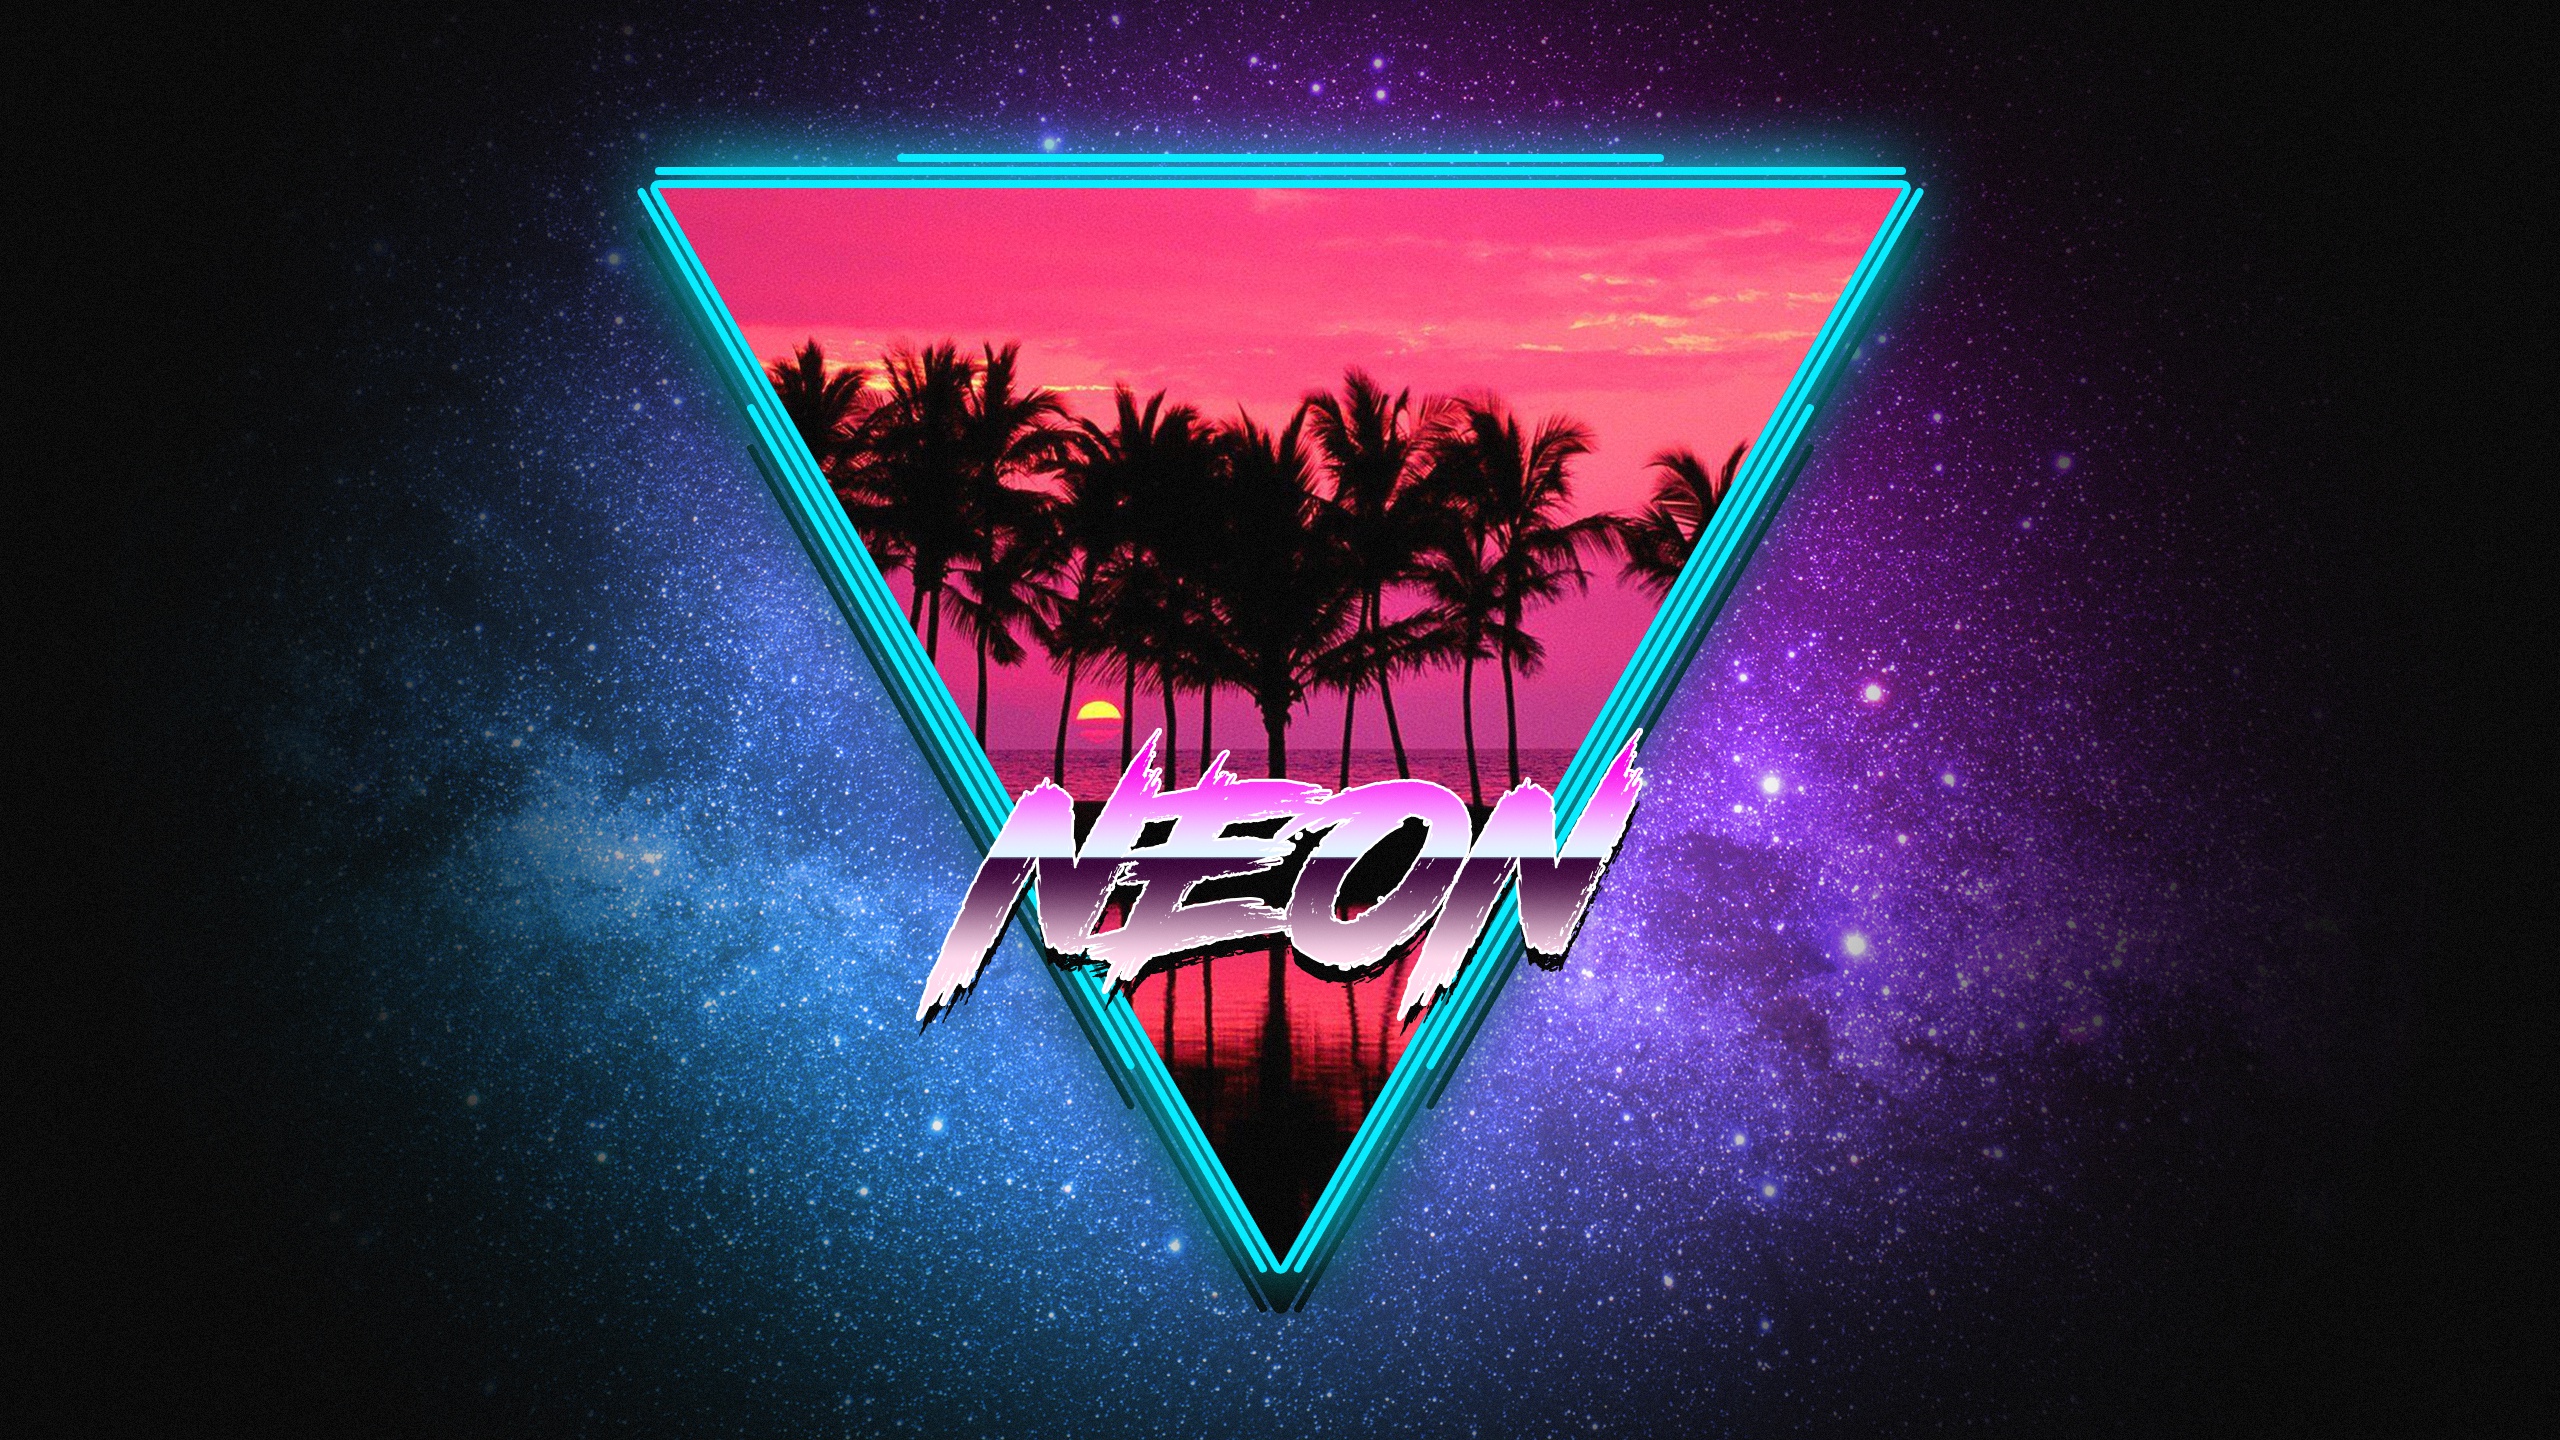 Neon Synthwave Retrowave Art Wallpapers | Wallpapers HD